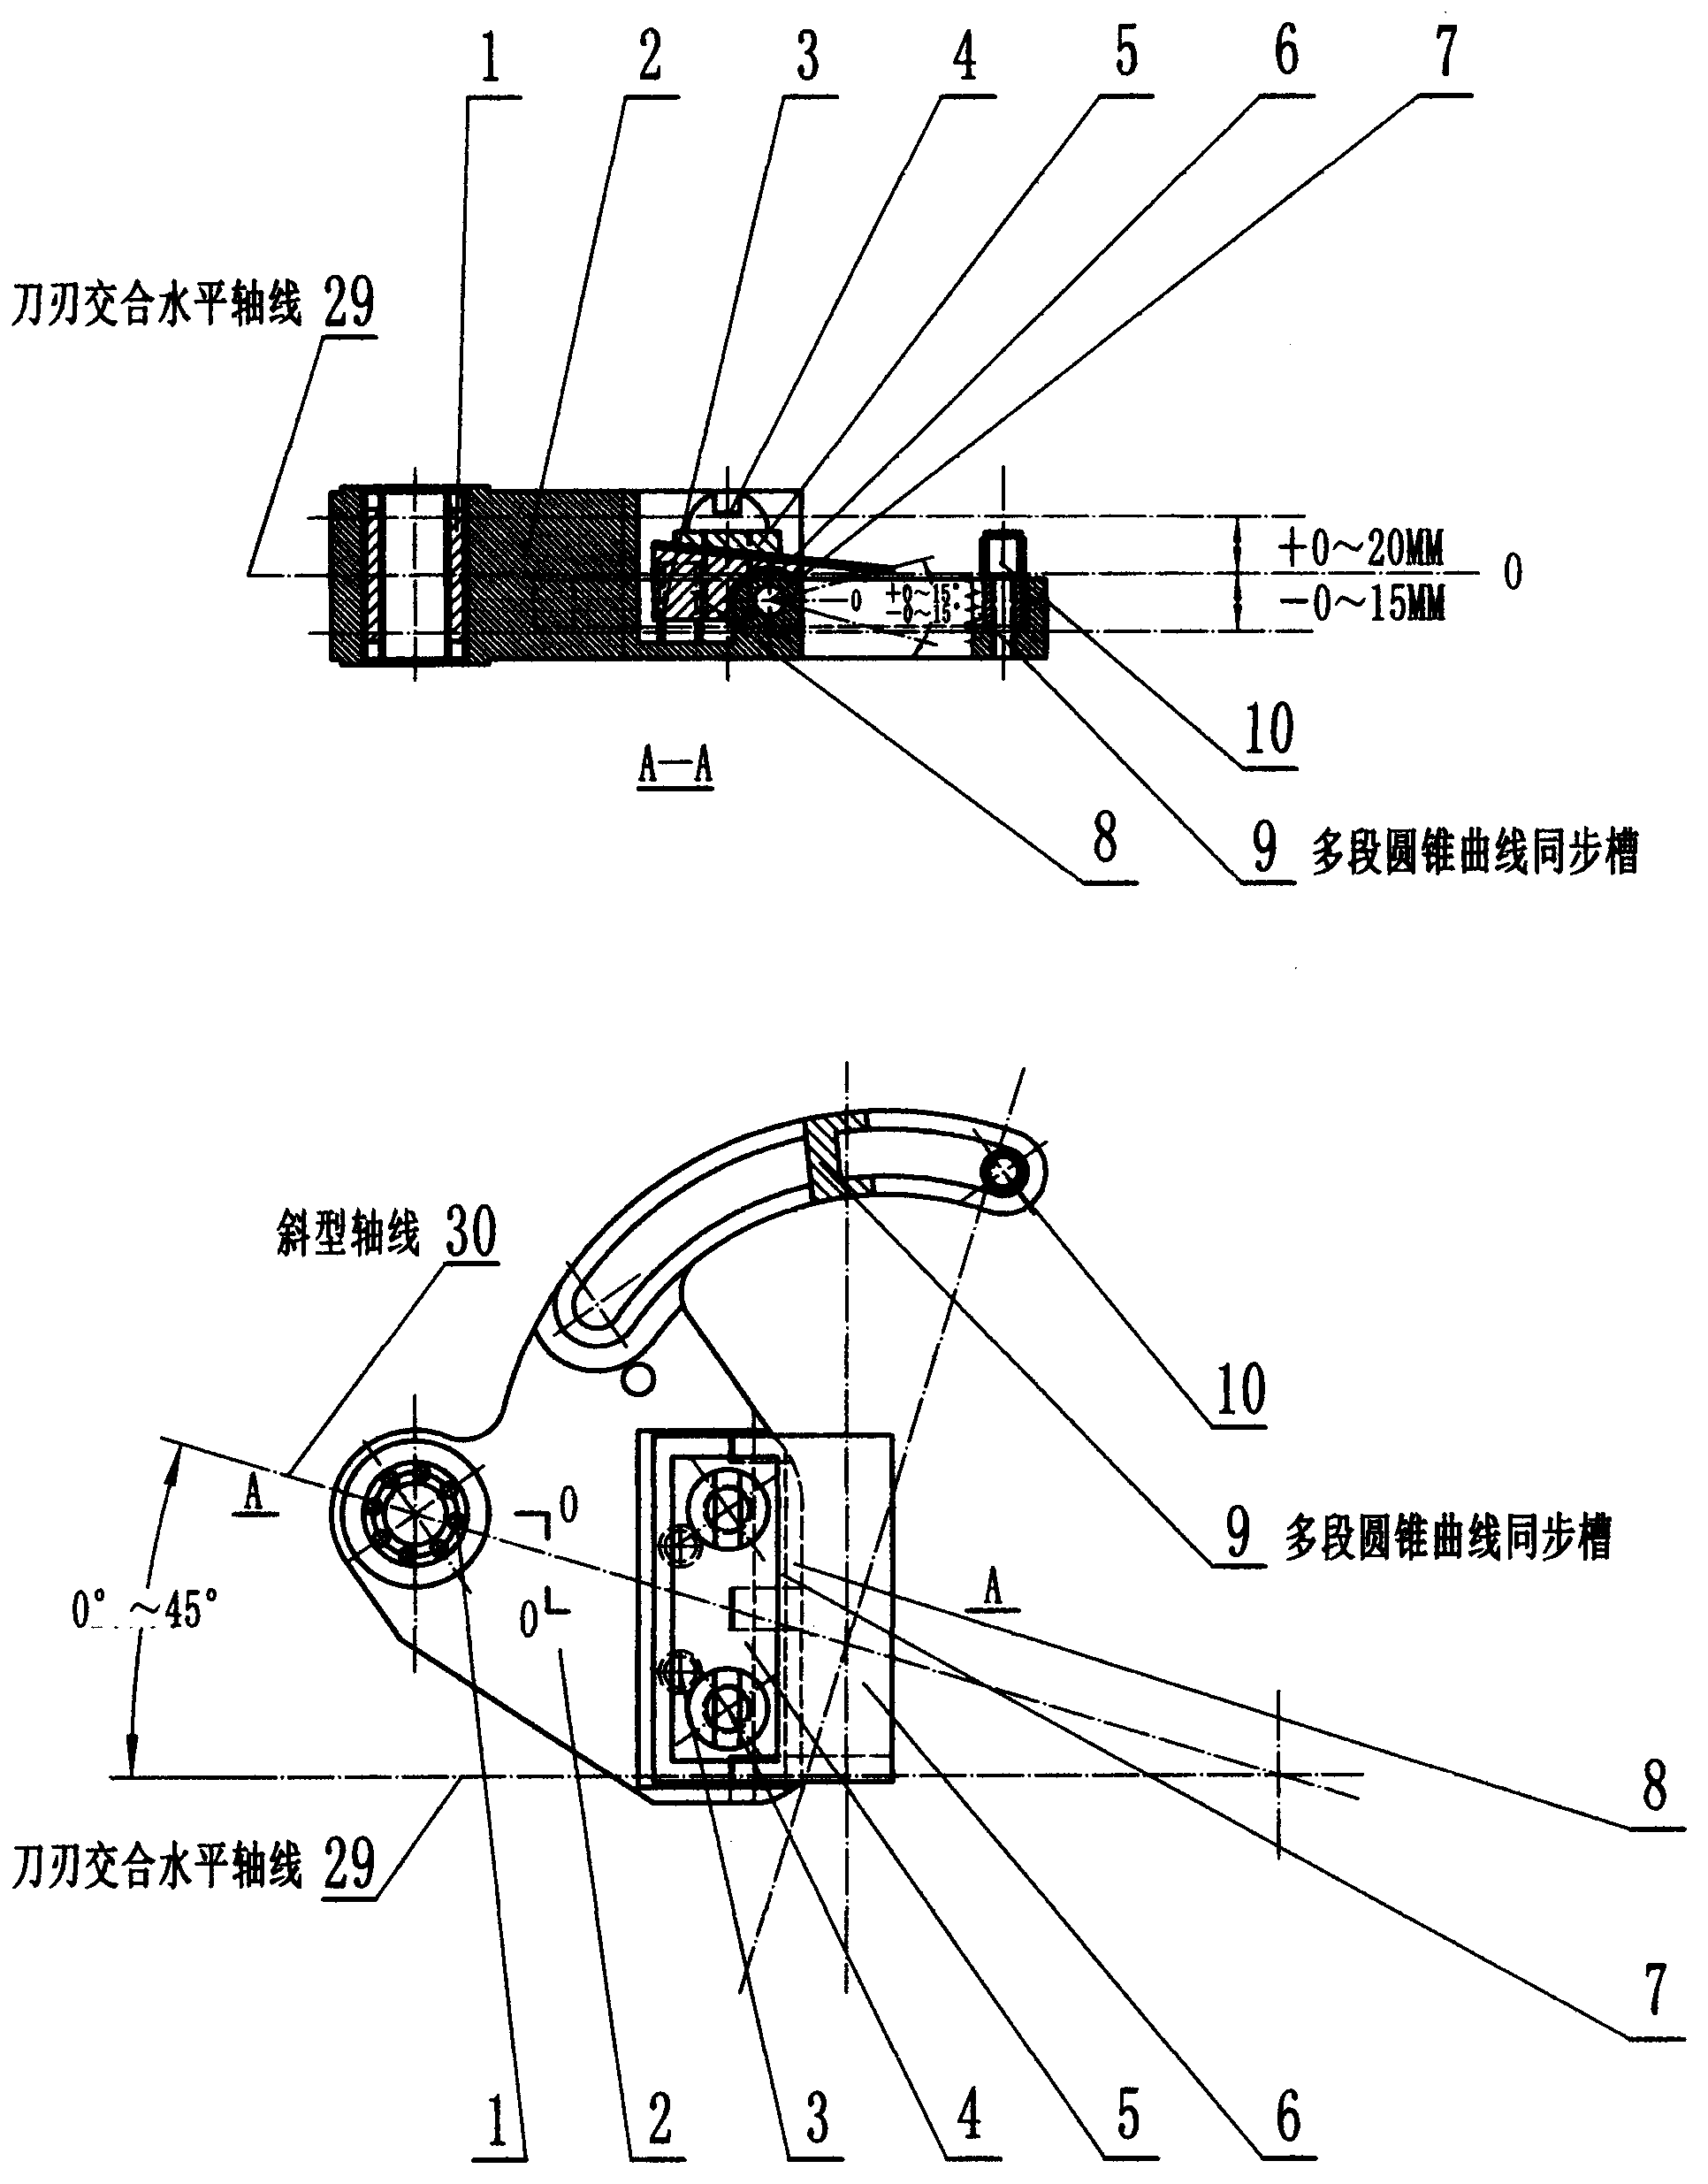 Oblique-axis horizontal-axis-knife automatic cutting-pulling harvester for fruits on high branches